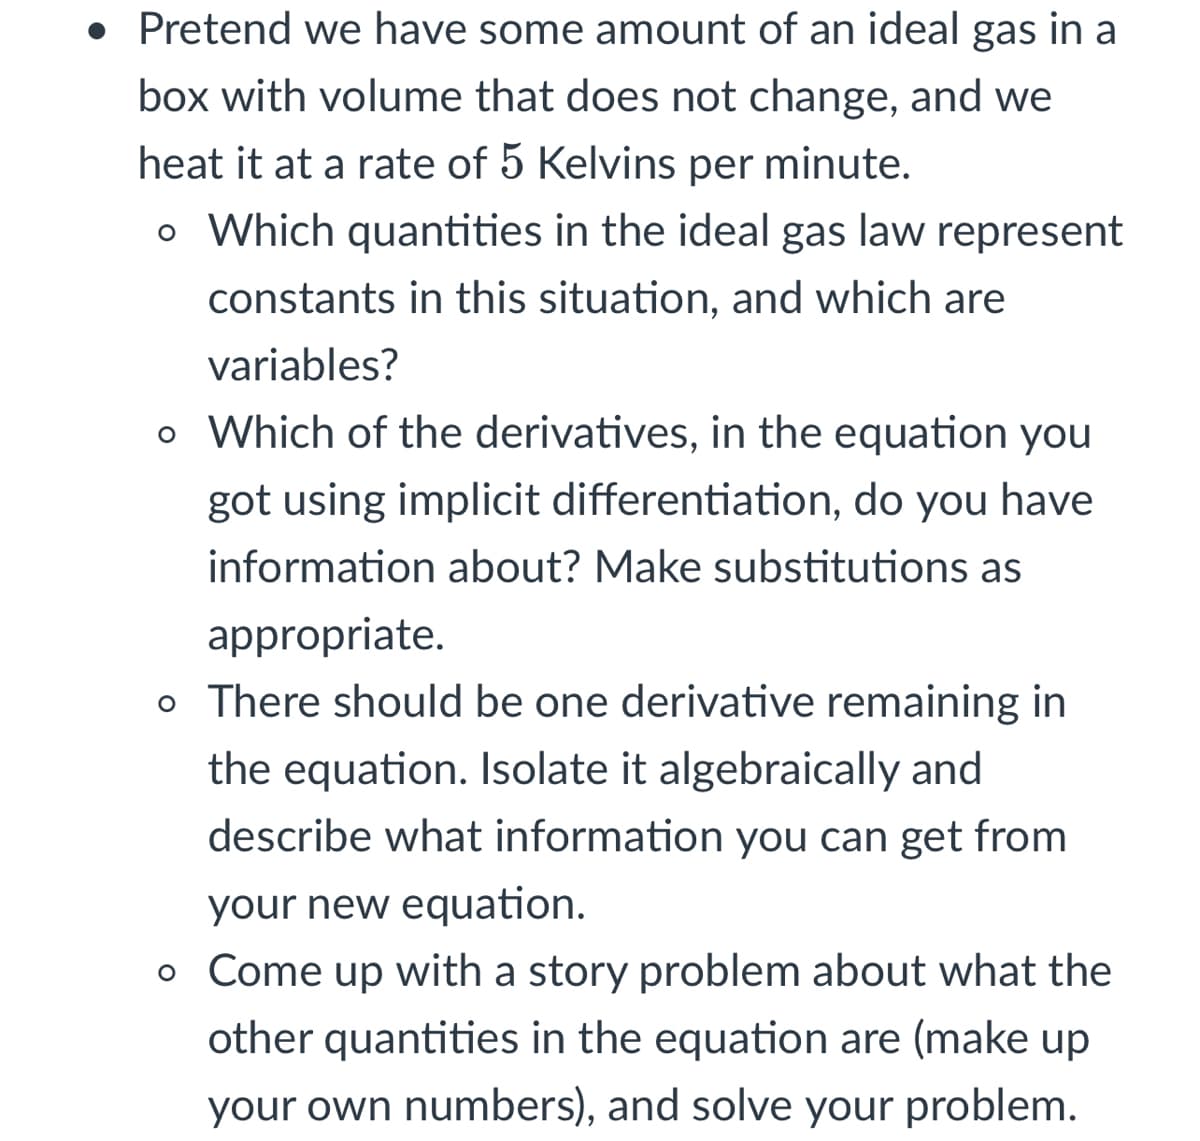 • Pretend we have some amount of an ideal gas in a
box with volume that does not change, and we
heat it at a rate of 5 Kelvins per minute.
o Which quantities in the ideal gas law represent
constants in this situation, and which are
variables?
o Which of the derivatives, in the equation you
got using implicit differentiation, do you have
information about? Make substitutions as
appropriate.
o There should be one derivative remaining in
the equation. Isolate it algebraically and
describe what information you can get from
your new equation.
o Come up with a story problem about what the
other quantities in the equation are (make up
your own numbers), and solve your problem.
